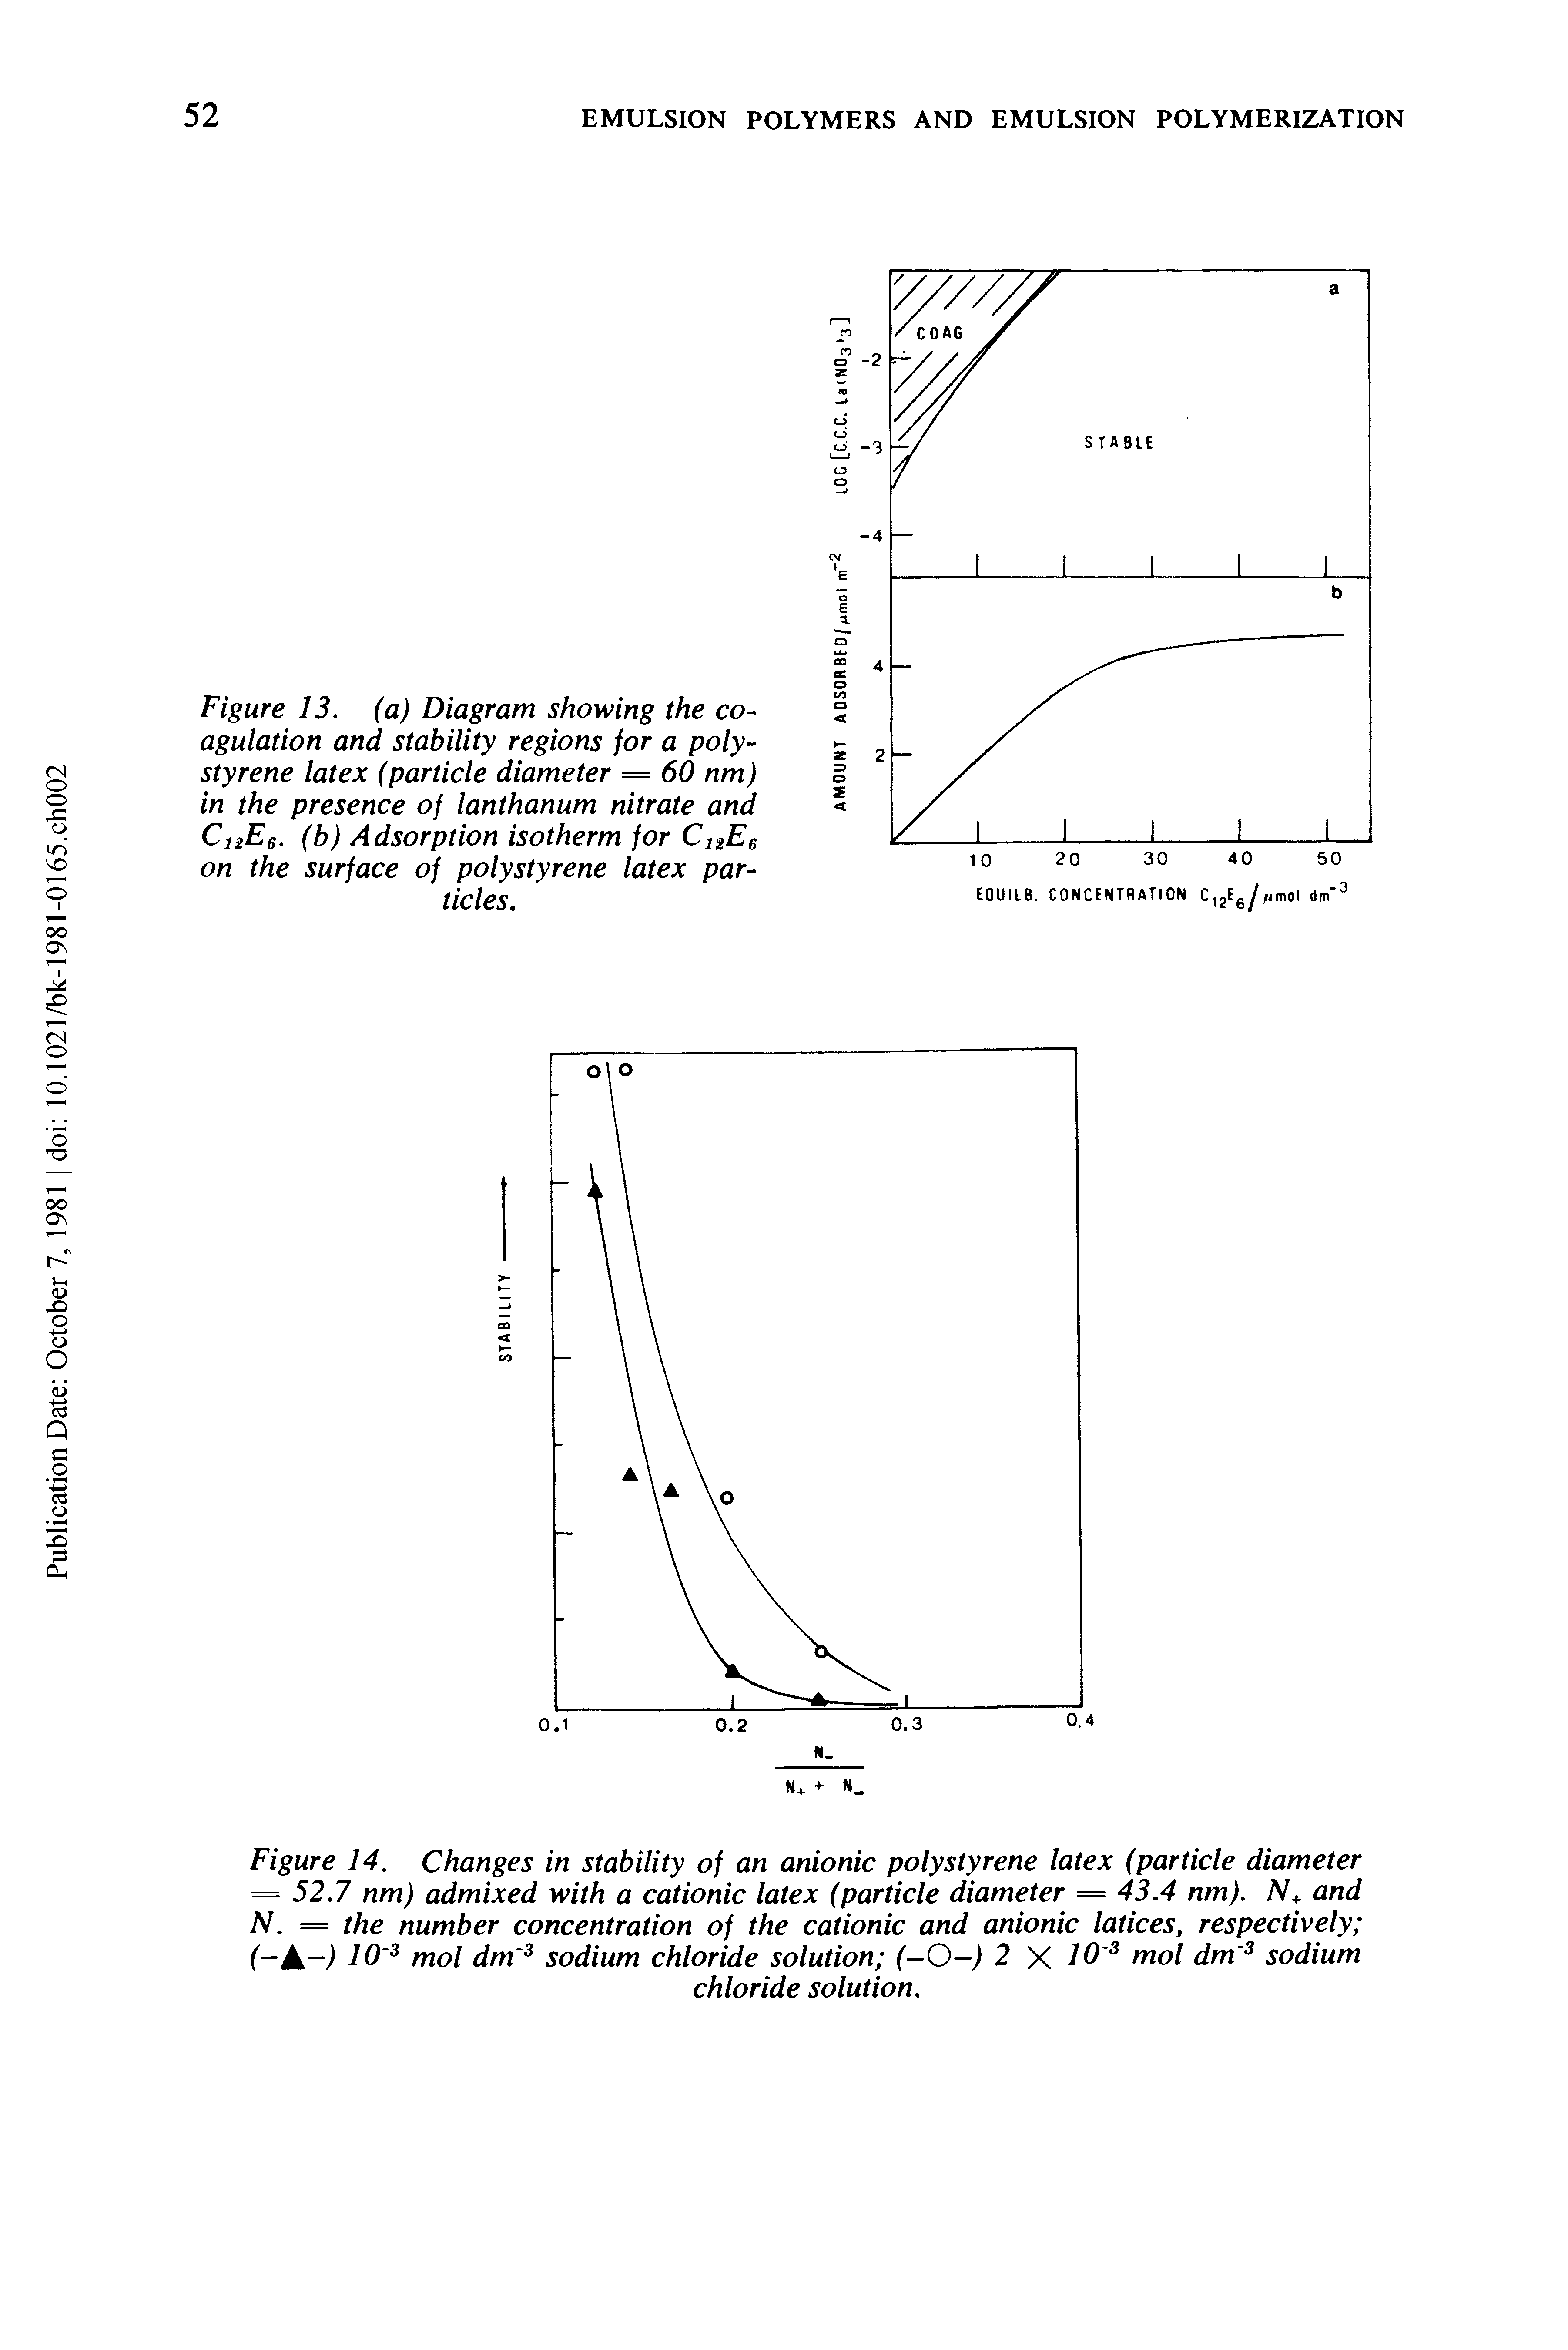 Figure 14. Changes in stability of an anionic polystyrene latex (particle diameter = 52.7 nm) admixed with a cationic latex (particle diameter = 43.4 nm). N+ and N. = the number concentration of the cationic and anionic latices, respectively (-A-) 10 3 mol dm 3 sodium chloride solution (-O-) 2 X 10 3 mol dm 3 sodium...